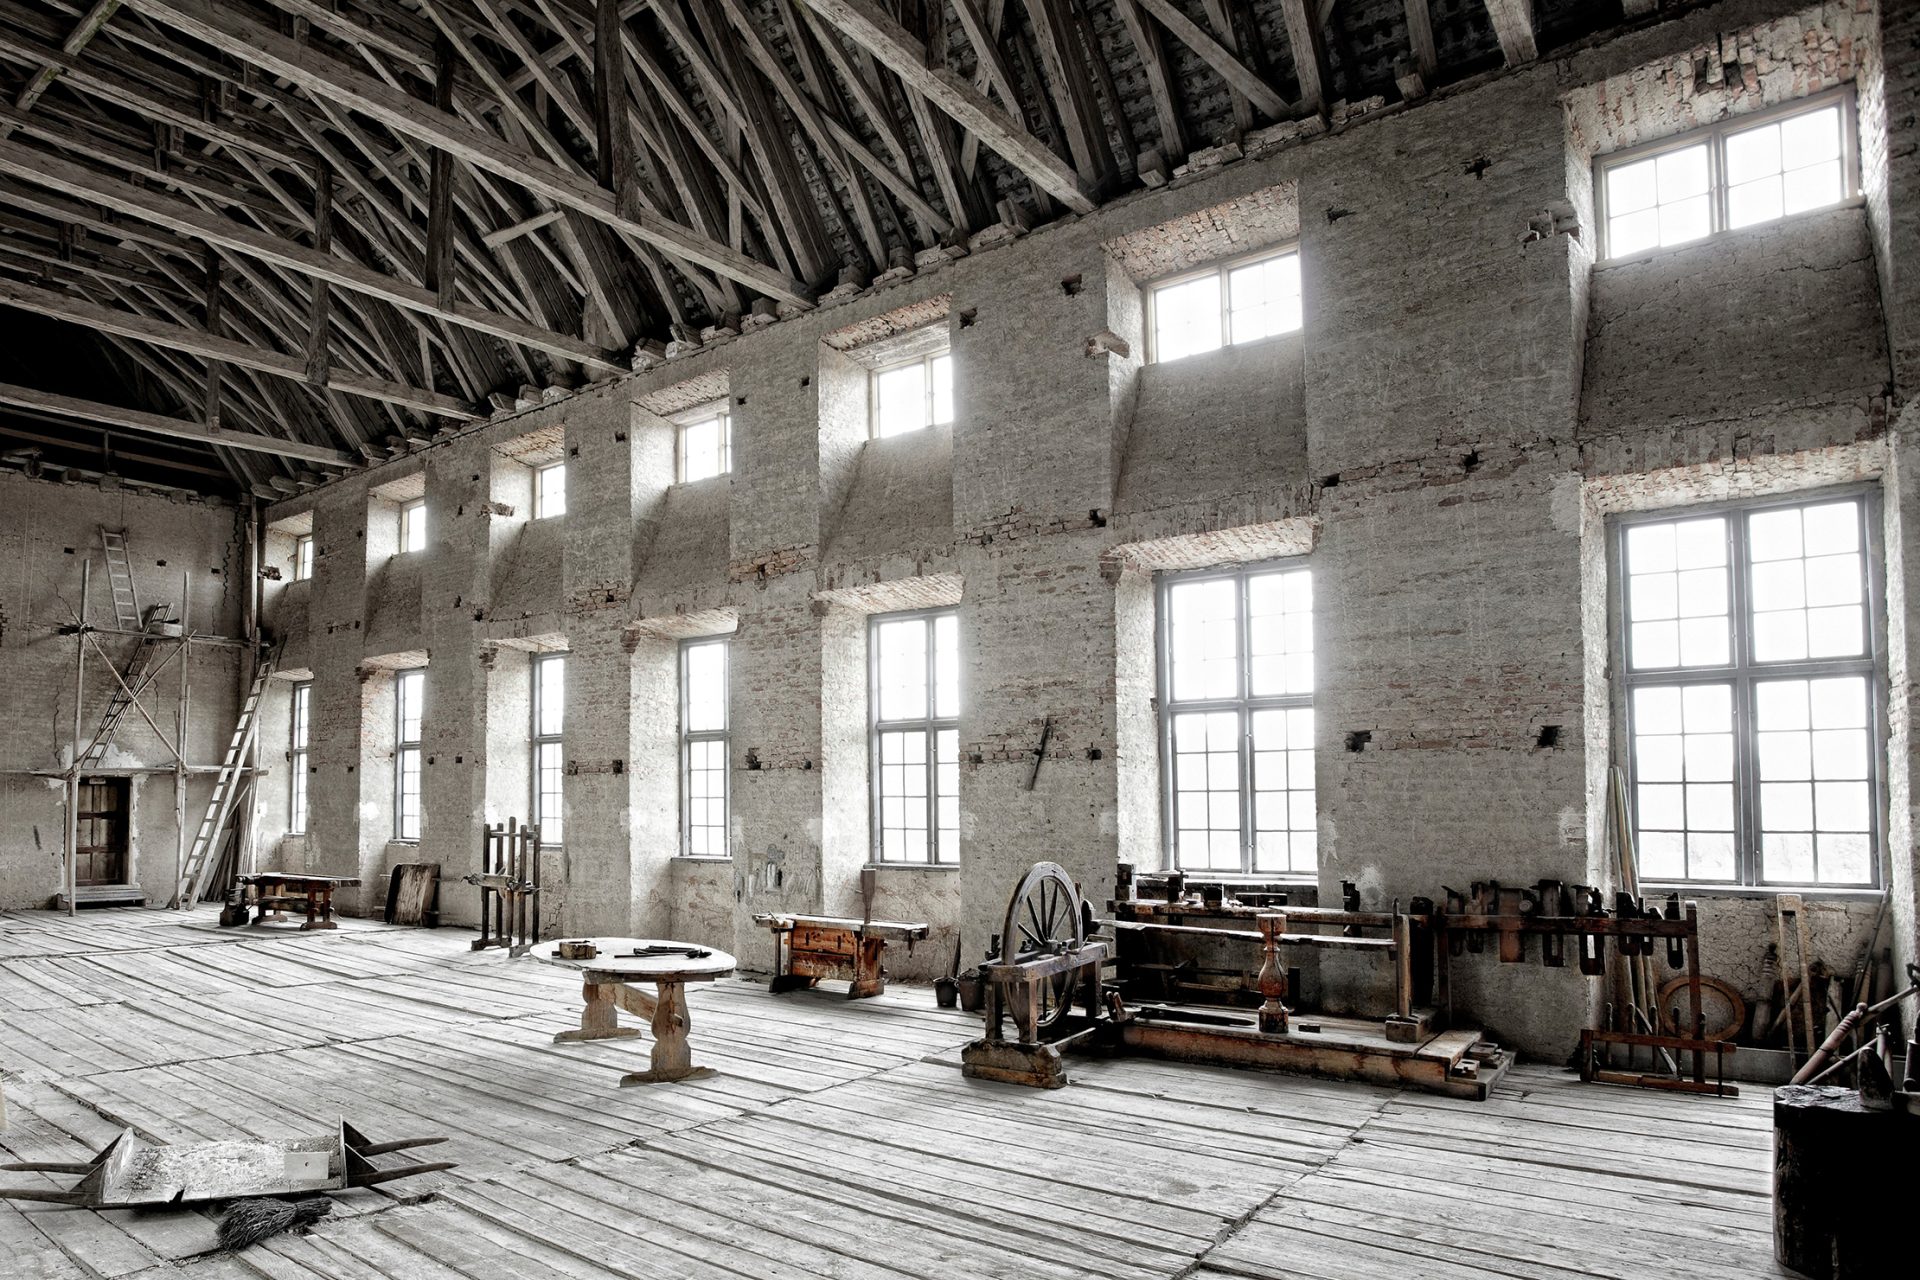 The Unfinished hall with tools standing on the wooden planks.